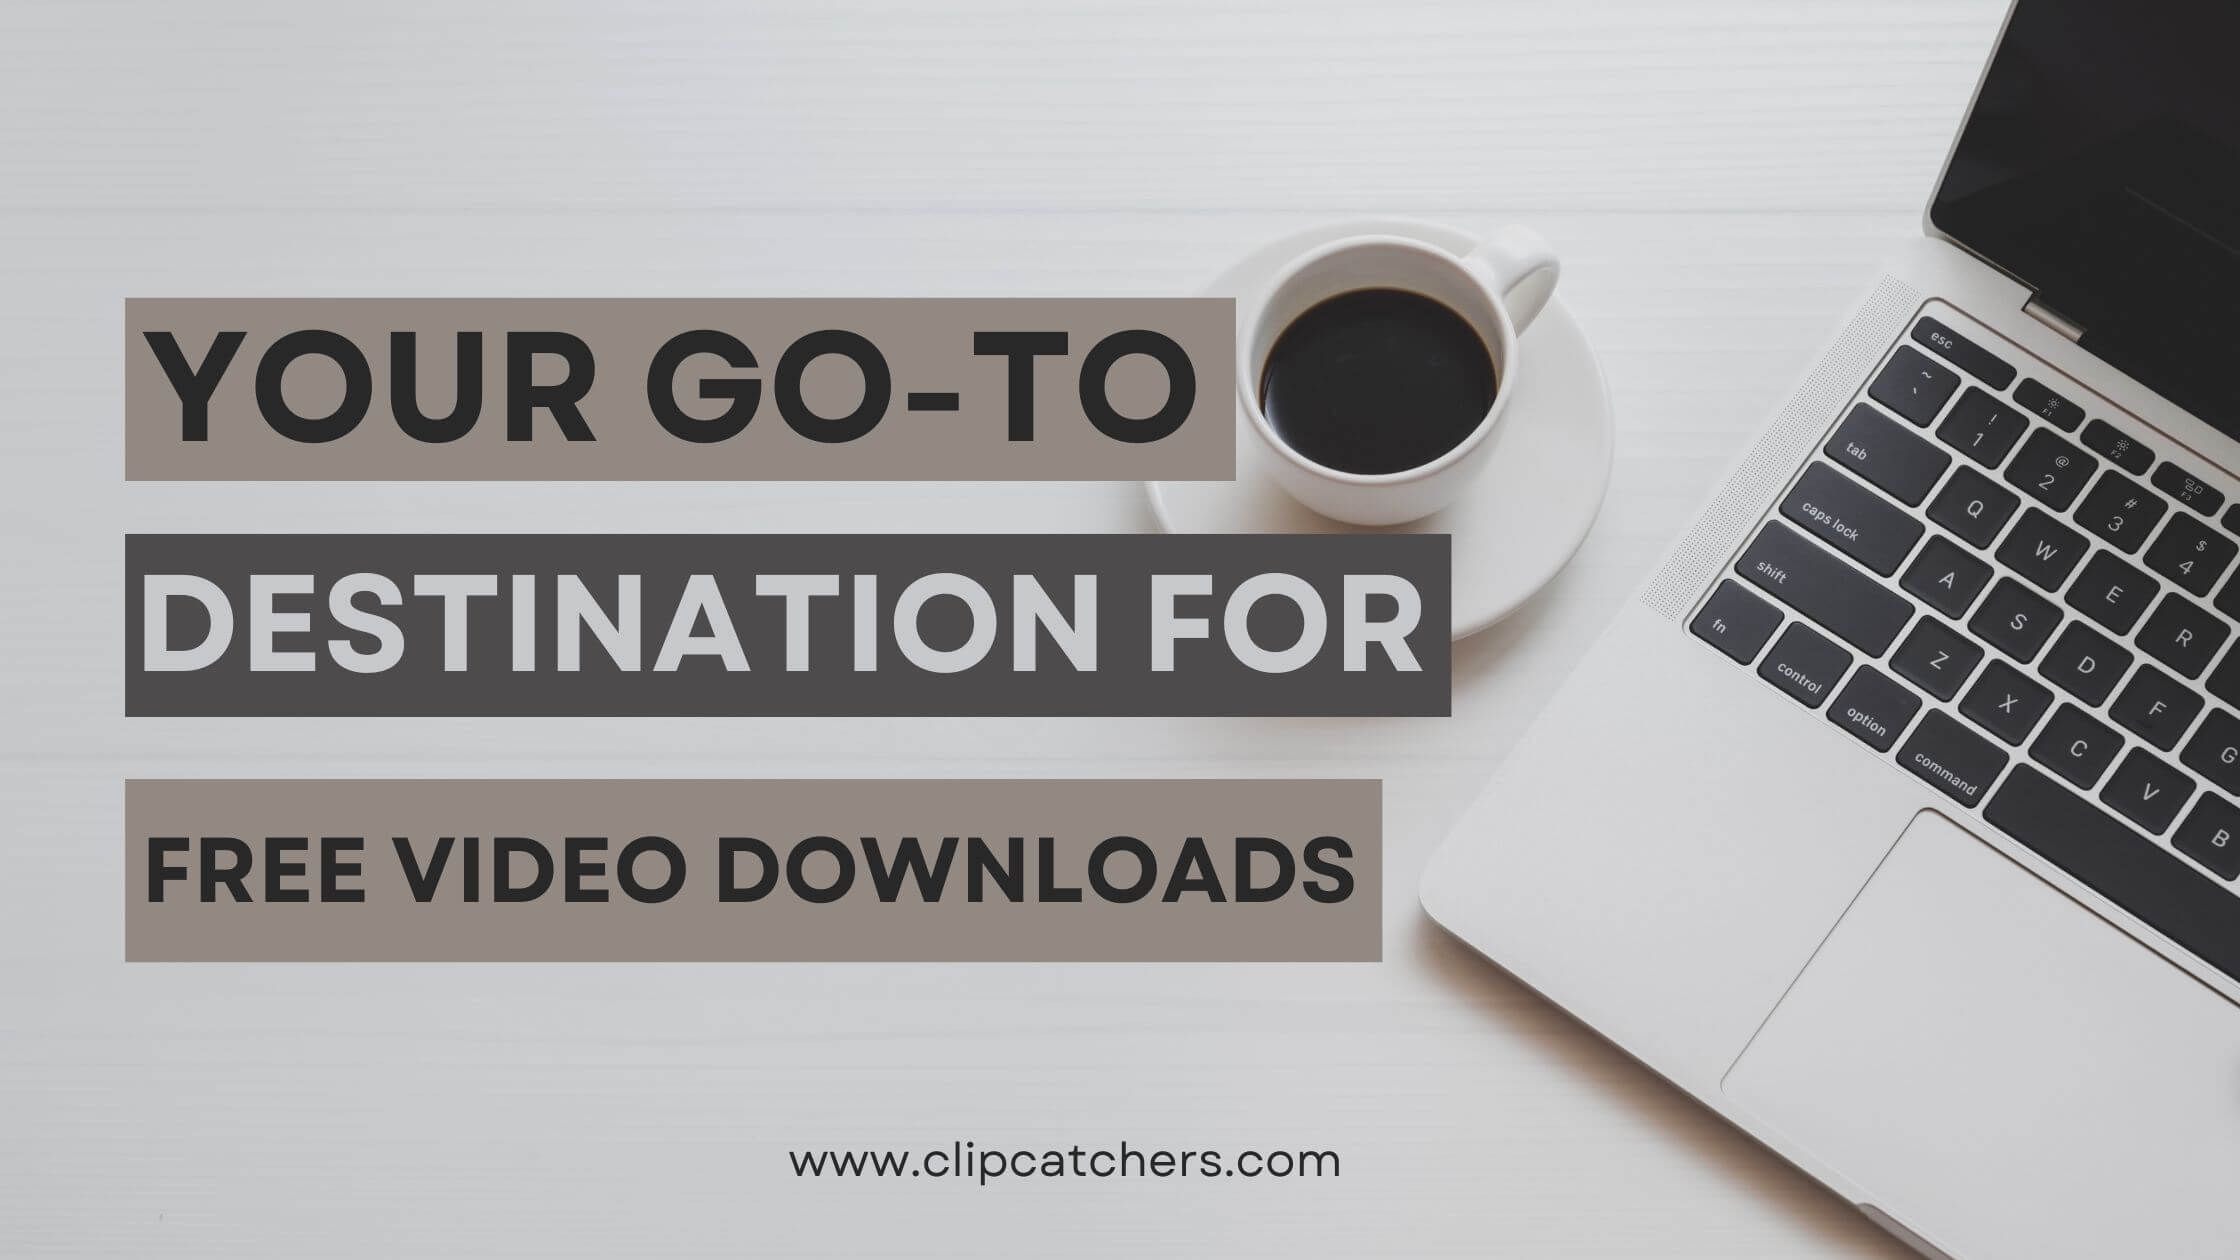 Your Go-To Destination for Free Video Downloads